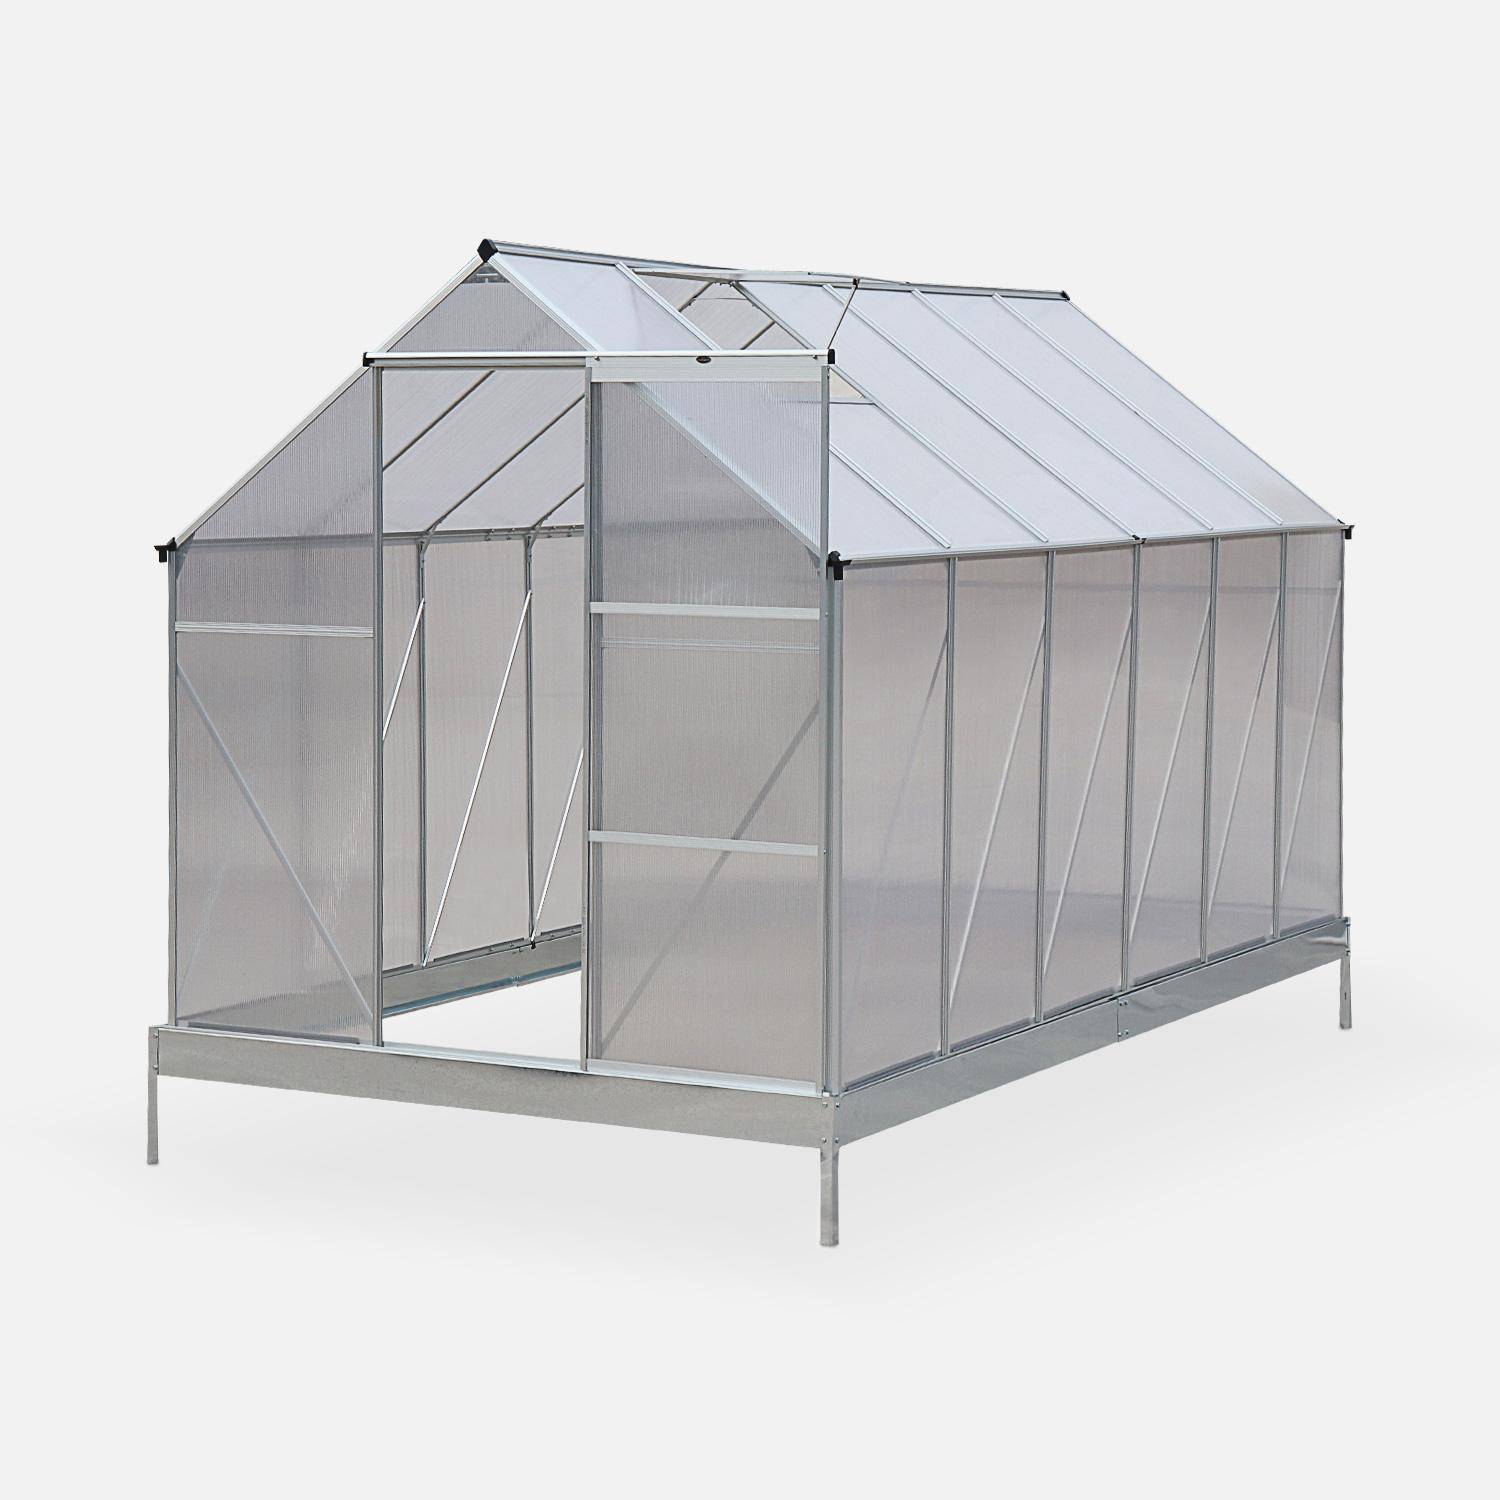 7m², 14x7FT polycarbonate (4mm) greenhouse with base frame - 2 skylights, gutter - Sapin - Grey Photo2